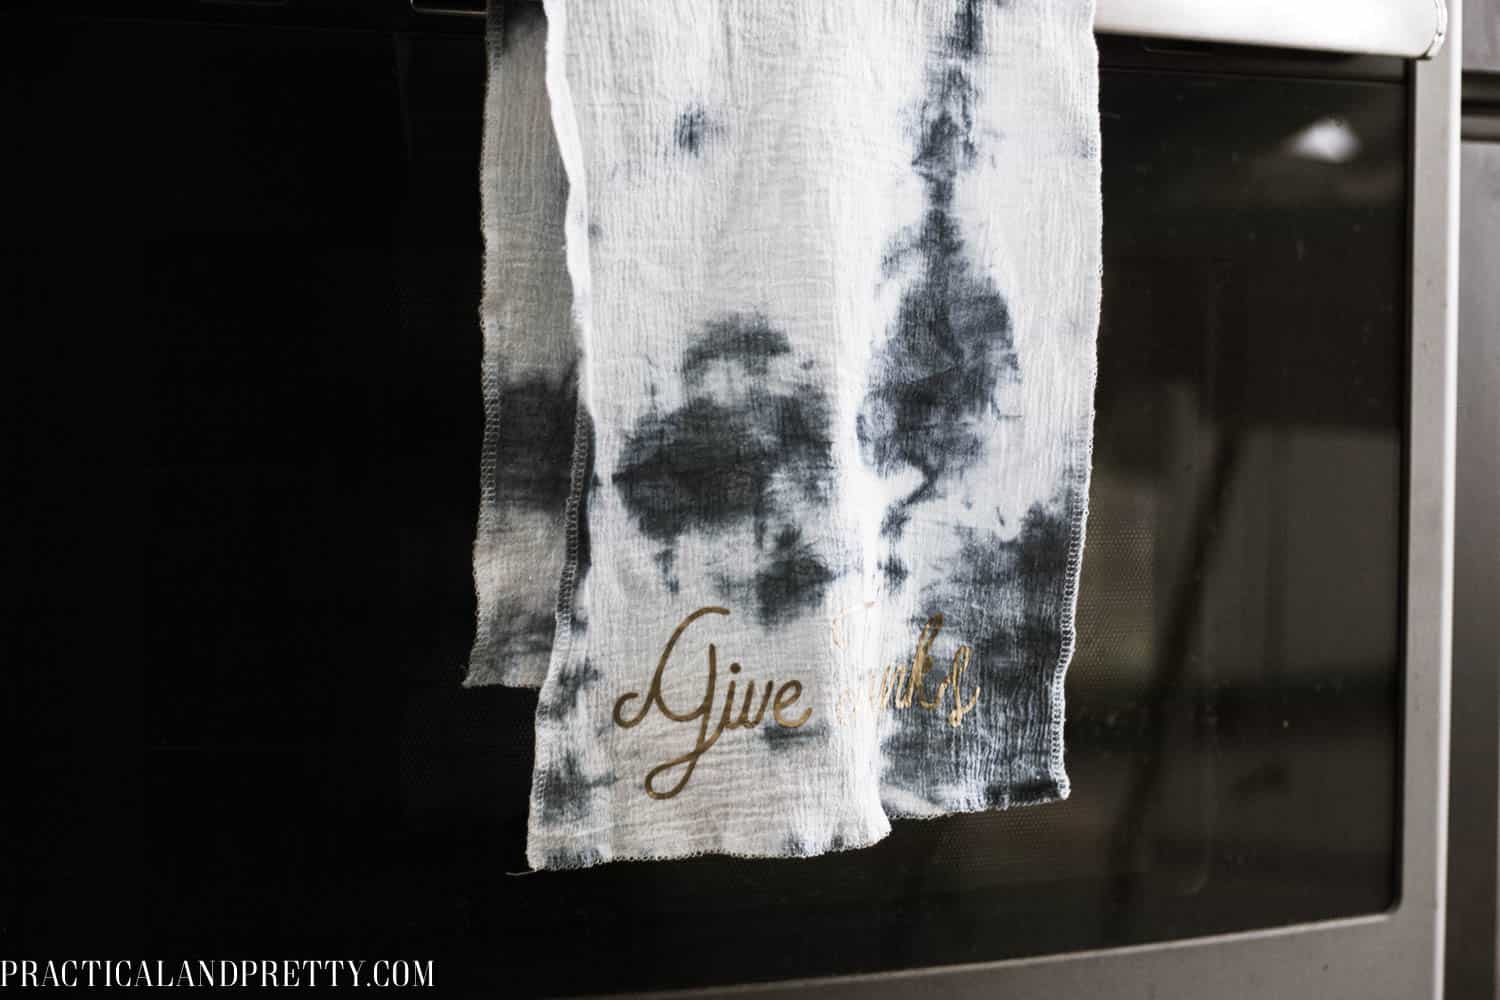 Grab some free files to make these DIY fall kitchen towels! Heat transfer vinyl can make anything look seasonal and festive.